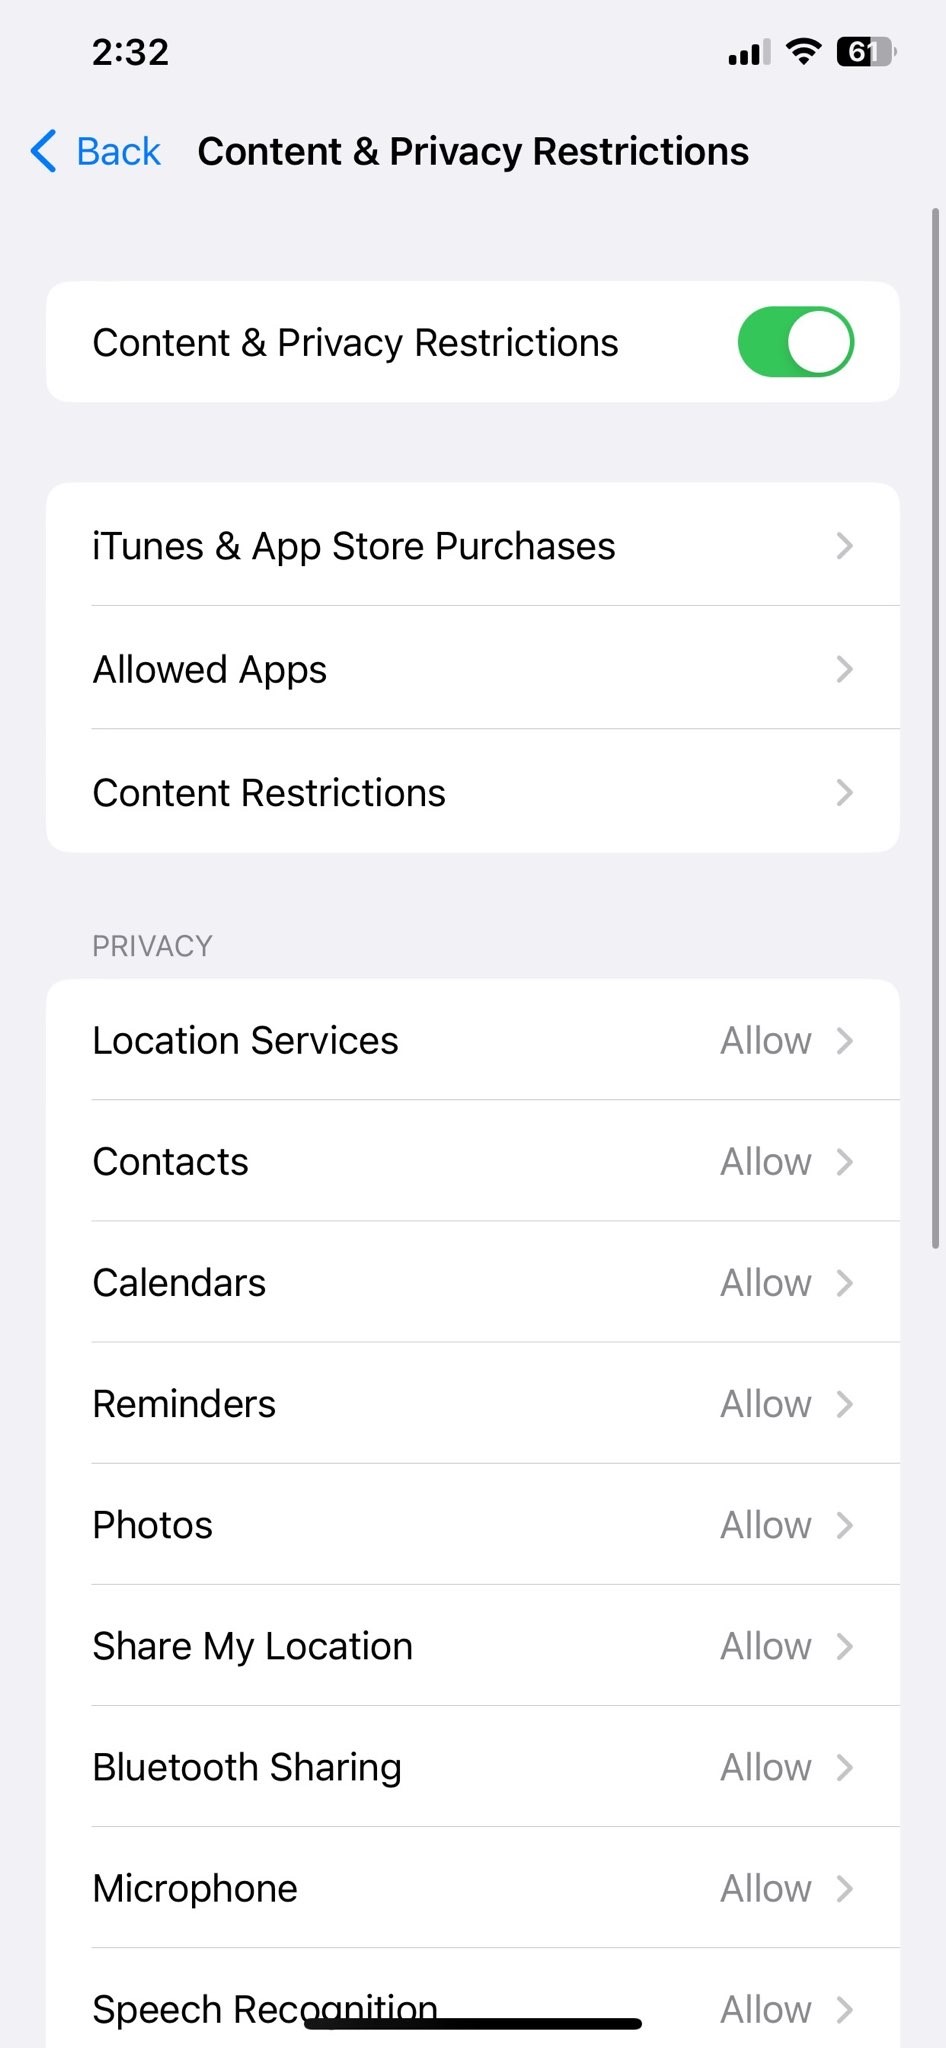 Tap 'Enable Restrictions' to get started